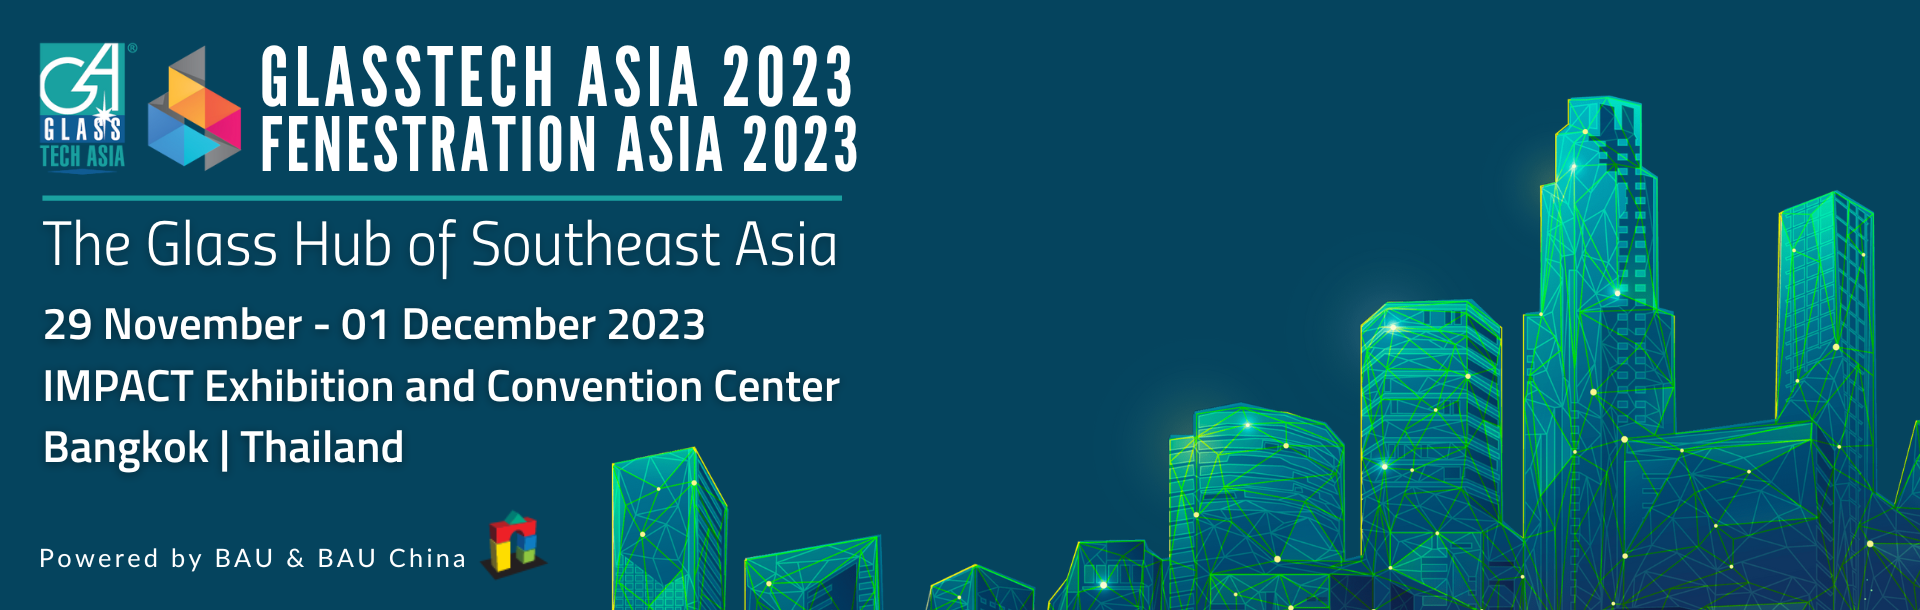 Glasstech Asia is the leading trade fair for the glass industry in Southeast Asia.